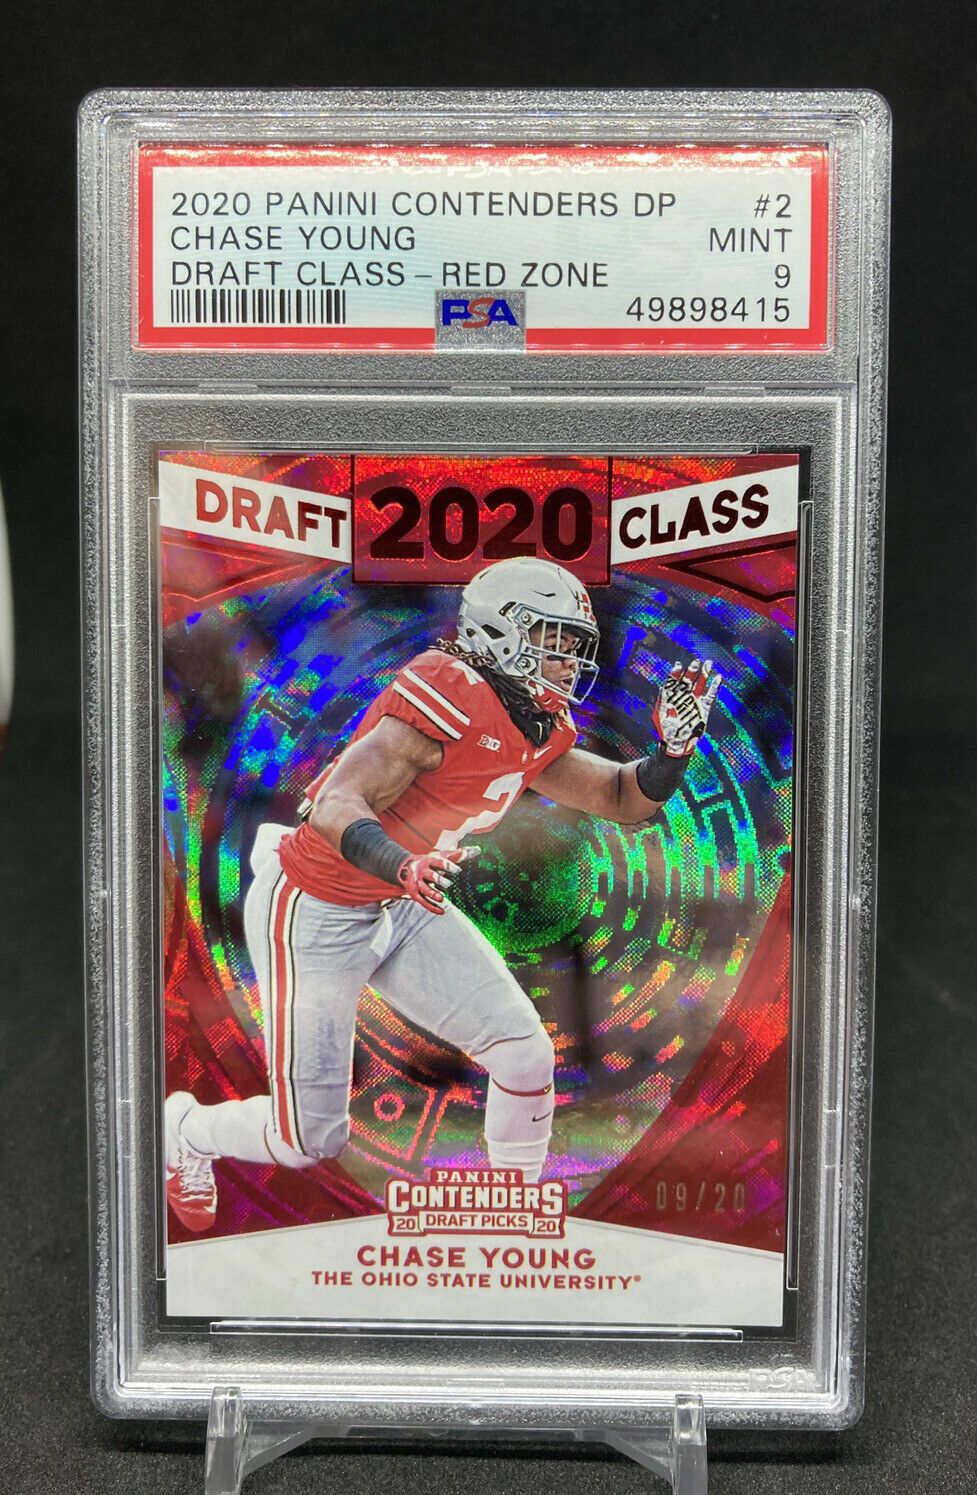 2020 Panini Contenders Draft Picks CHASE YOUNG Rookie Draft Class Red Zone 